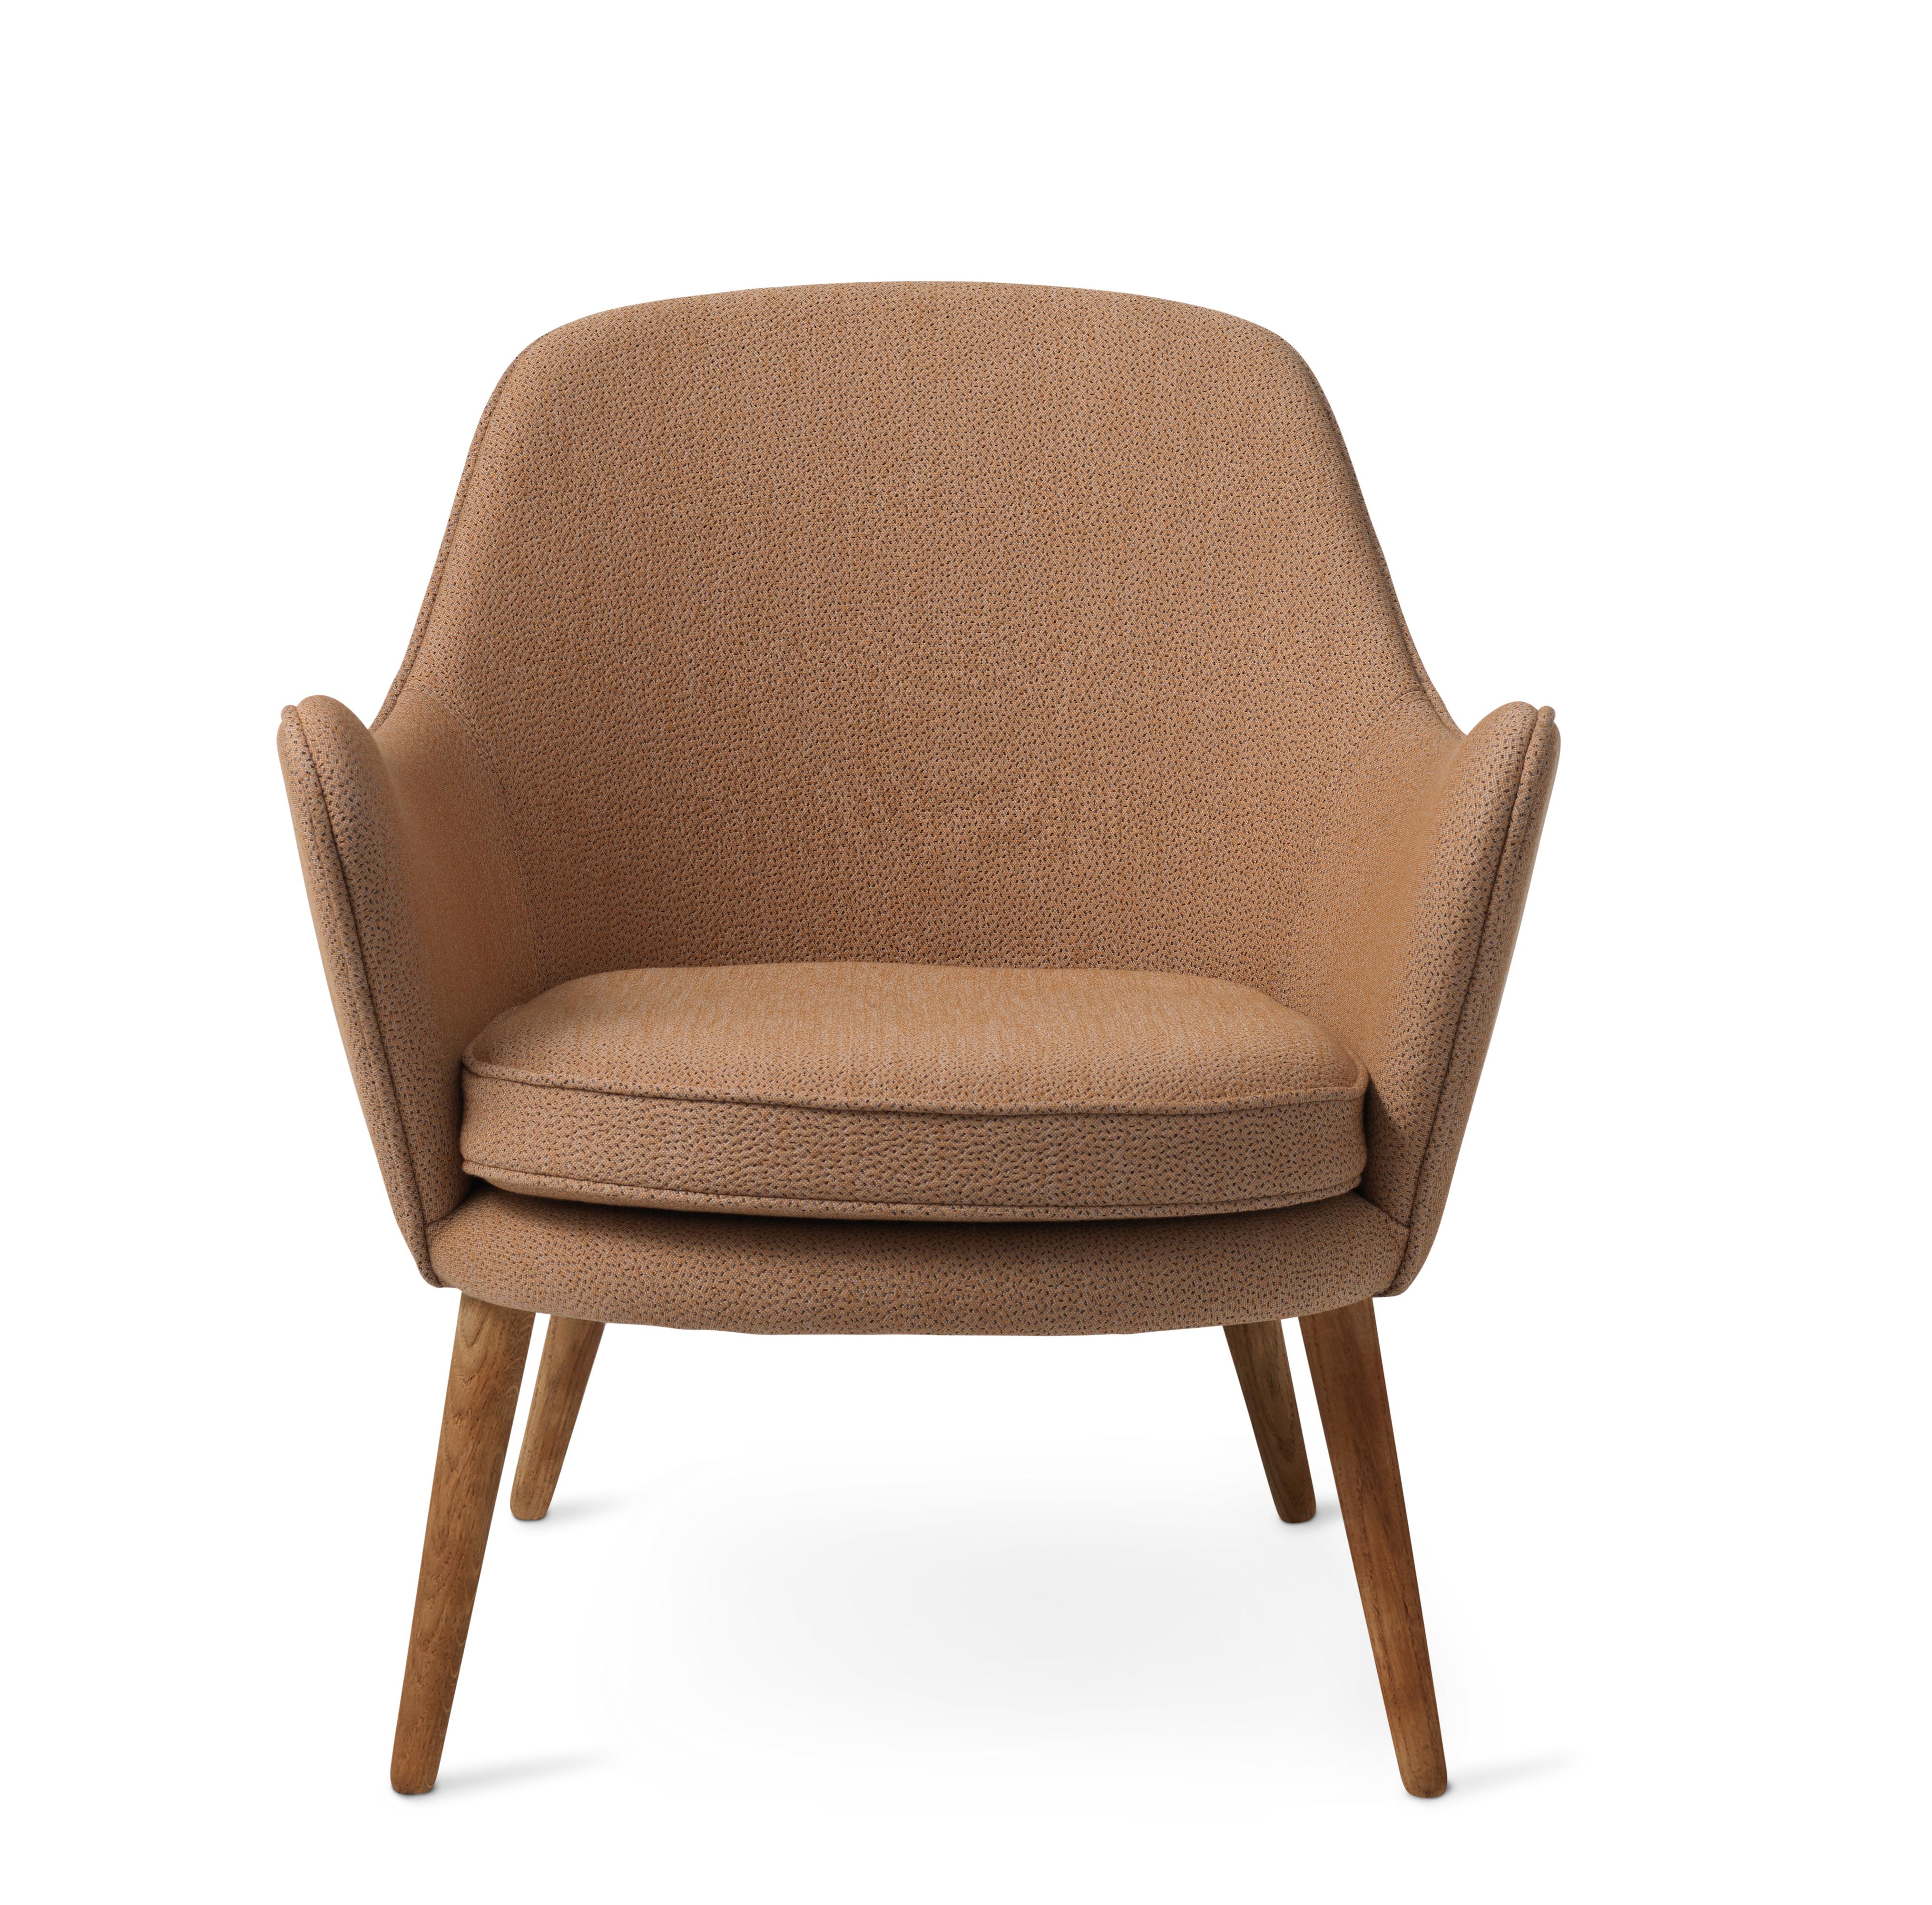 For Sale: Beige (Sprinkles 254) Dwell Lounge Chair, by Hans Olsen from Warm Nordic 2